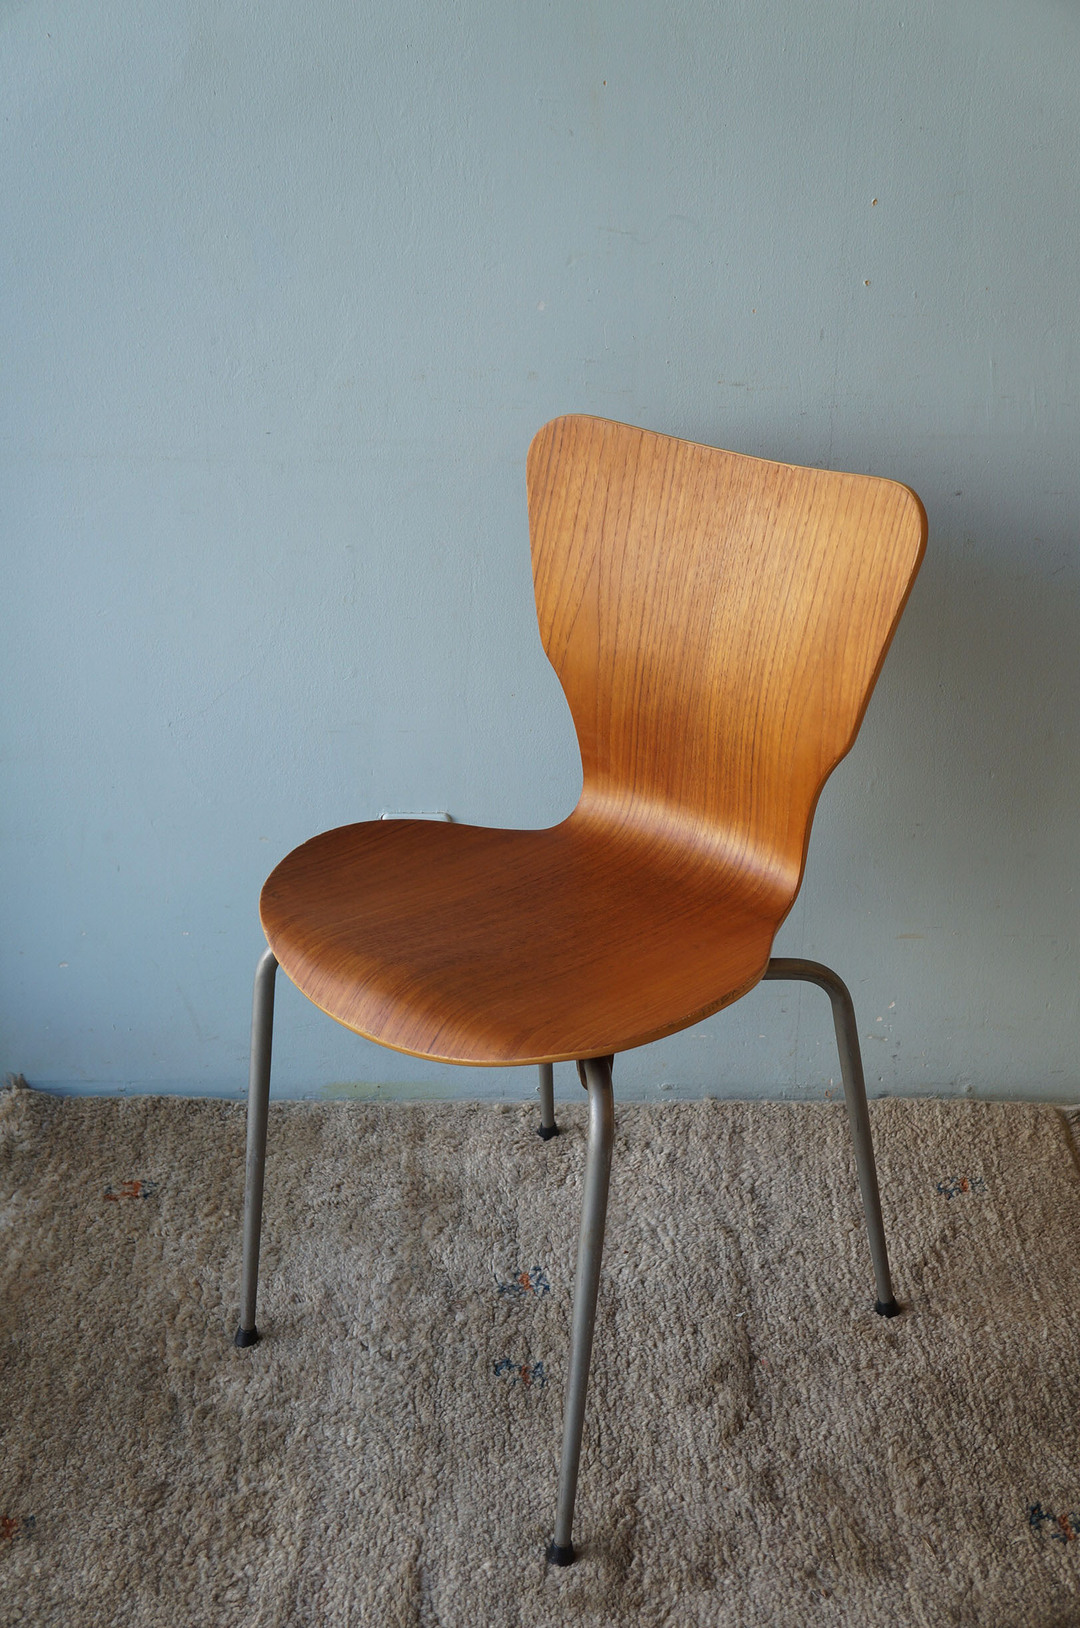 Danish Vintage Teak Plywood Stacking Chair MH Stålmøbler/デンマークヴィンテージ スタッキングチェア チーク材 プライウッド 椅子 ミッドセンチュリー モダン 北欧家具 3